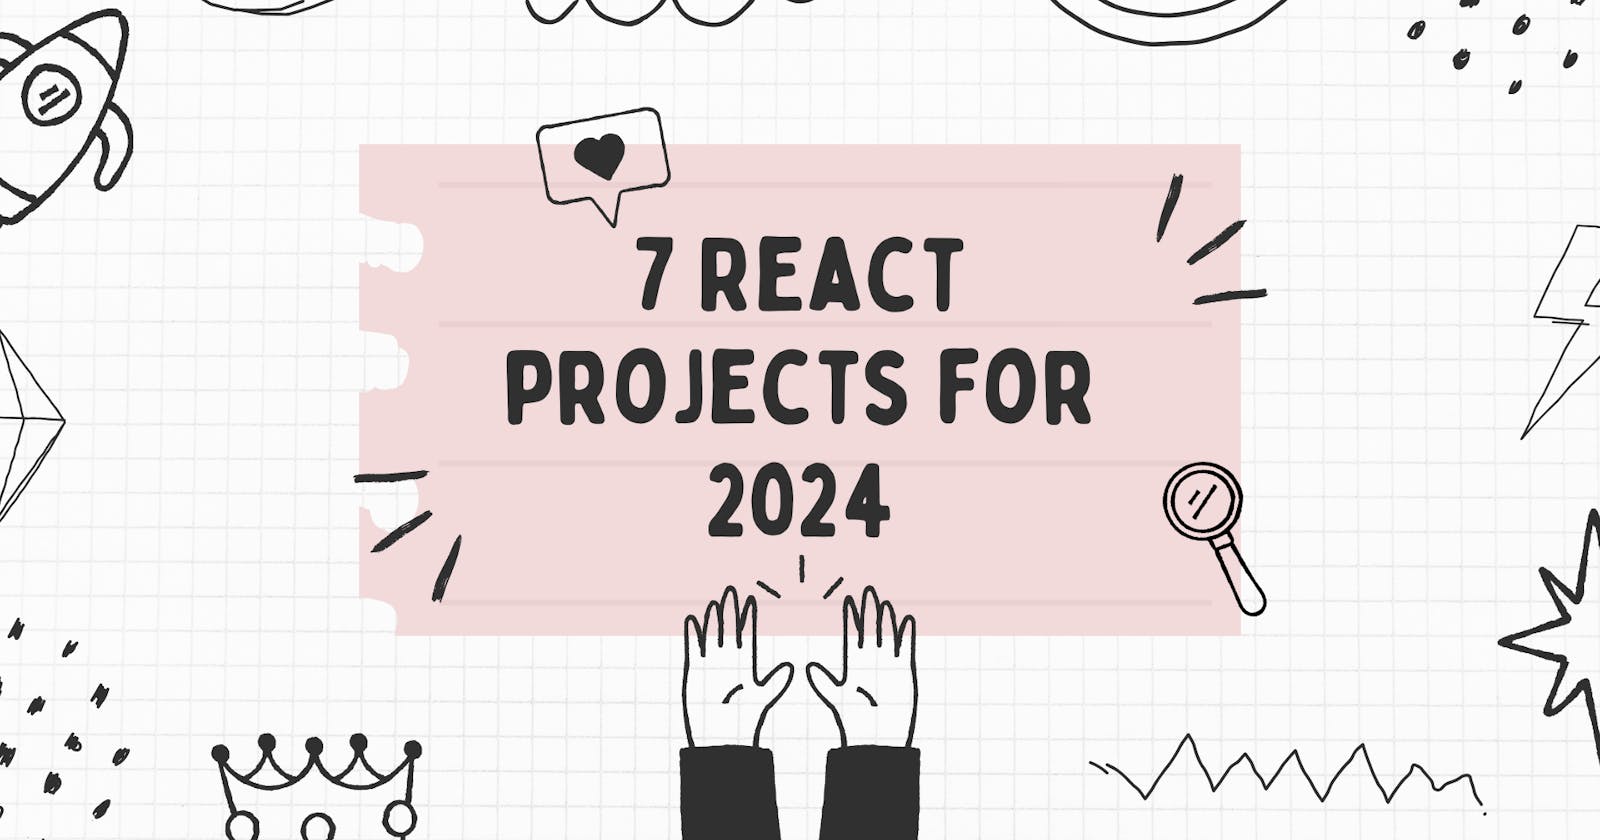 7 React Projects for 2024